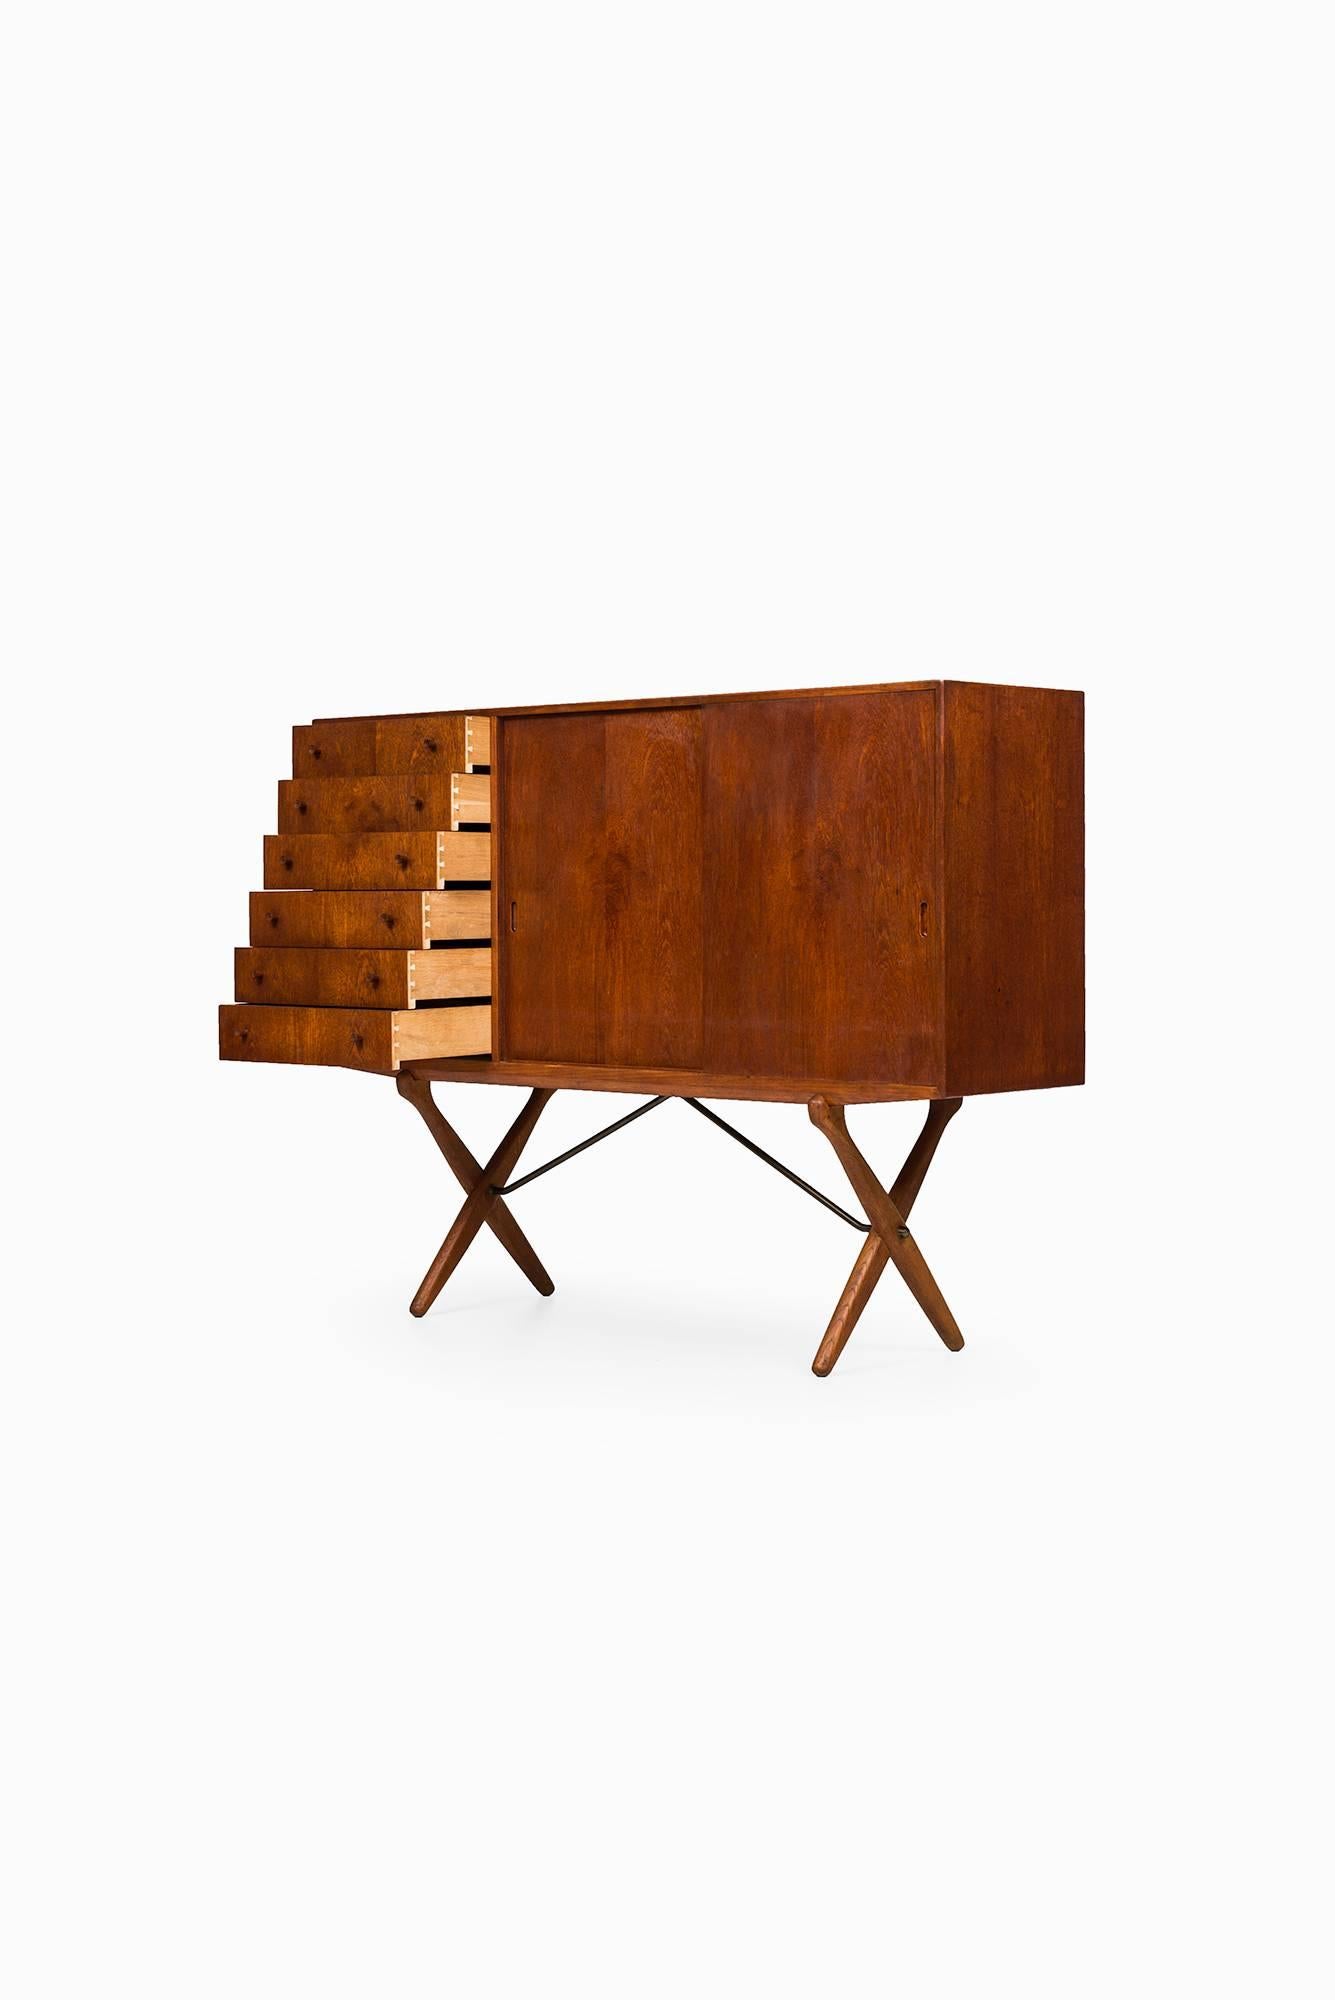 Mid-20th Century Rare Sideboard Designed by Hans Wegner and Produced by Andreas Tuck in Denmark